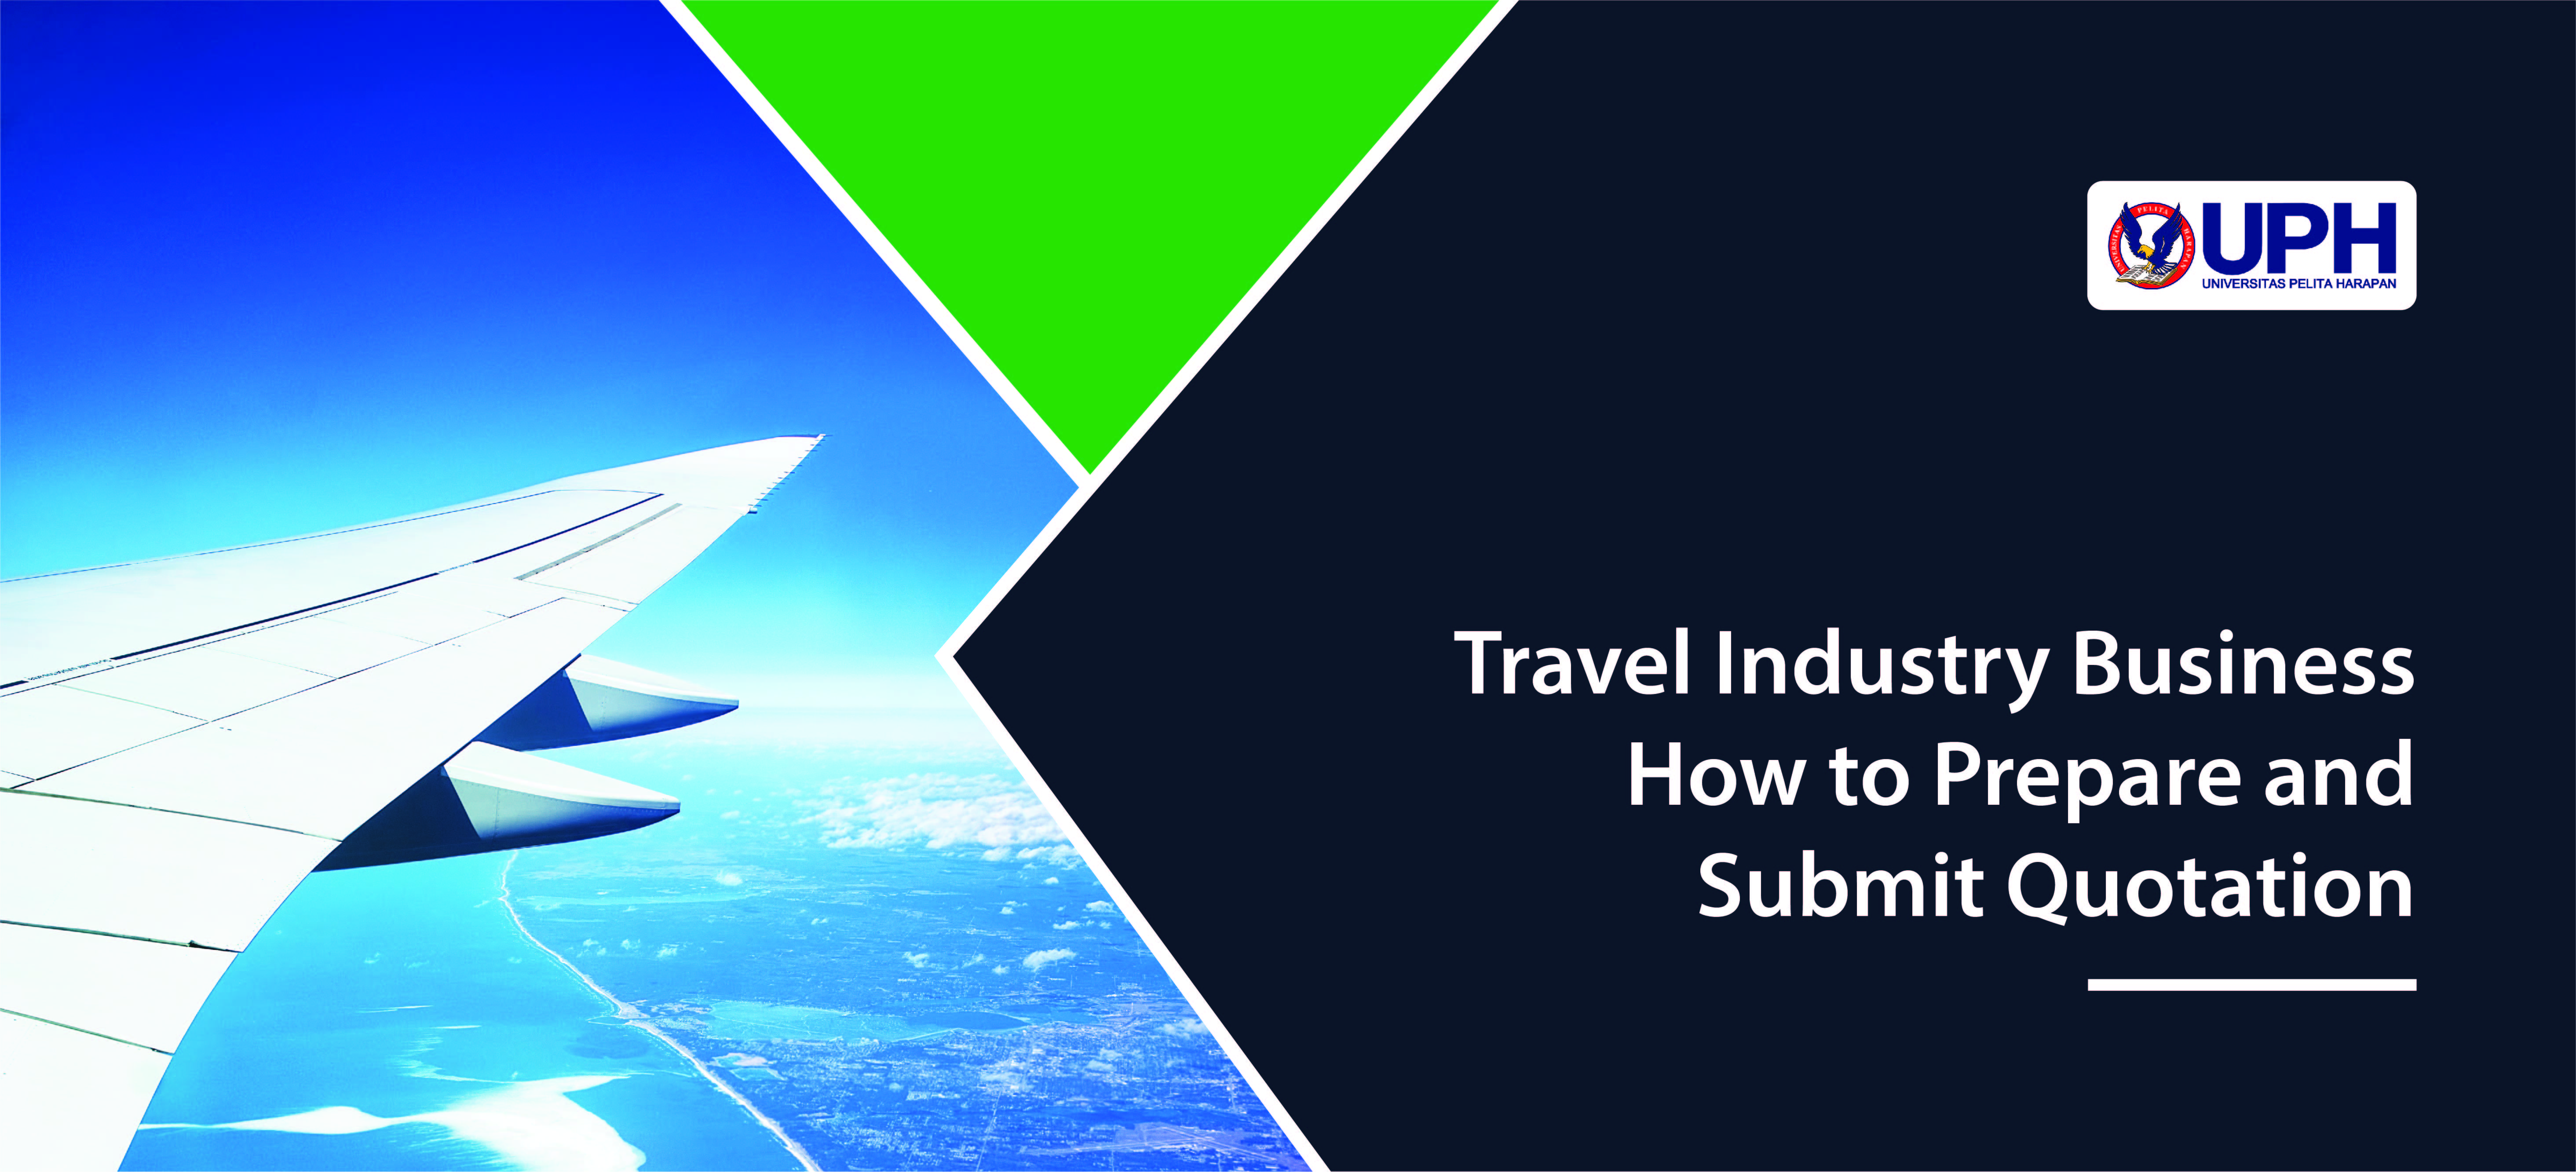 Travel Industry Business: How to Prepare and Submit Quotation PJJ111012/031034612008